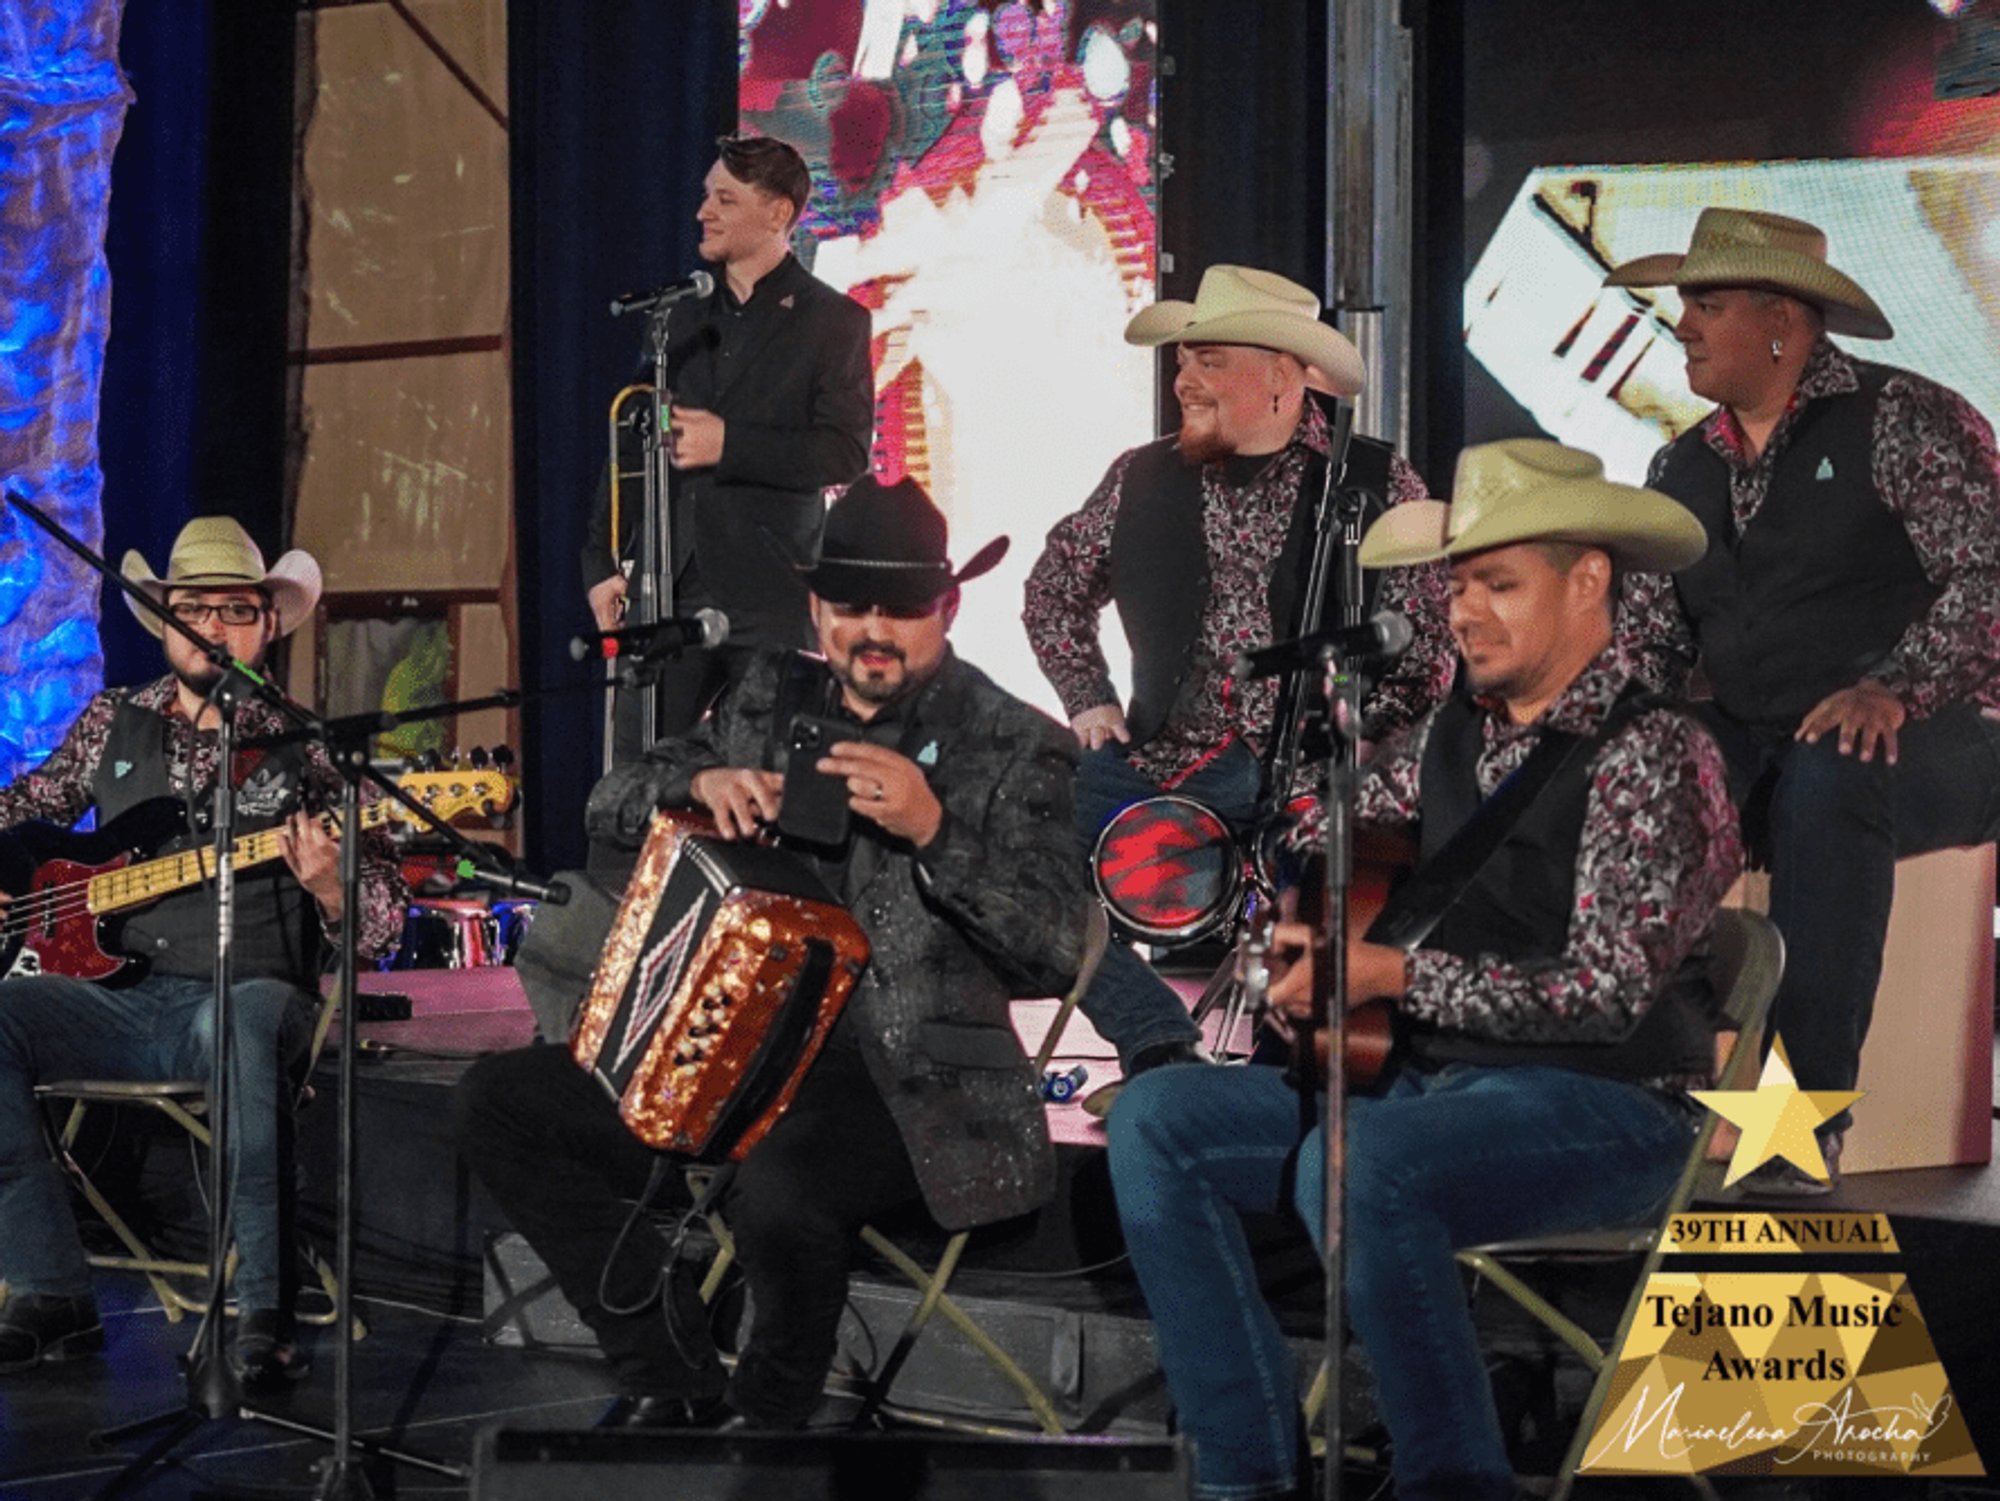 A performance at the 2019 Tejano Music Awards in San Antonio